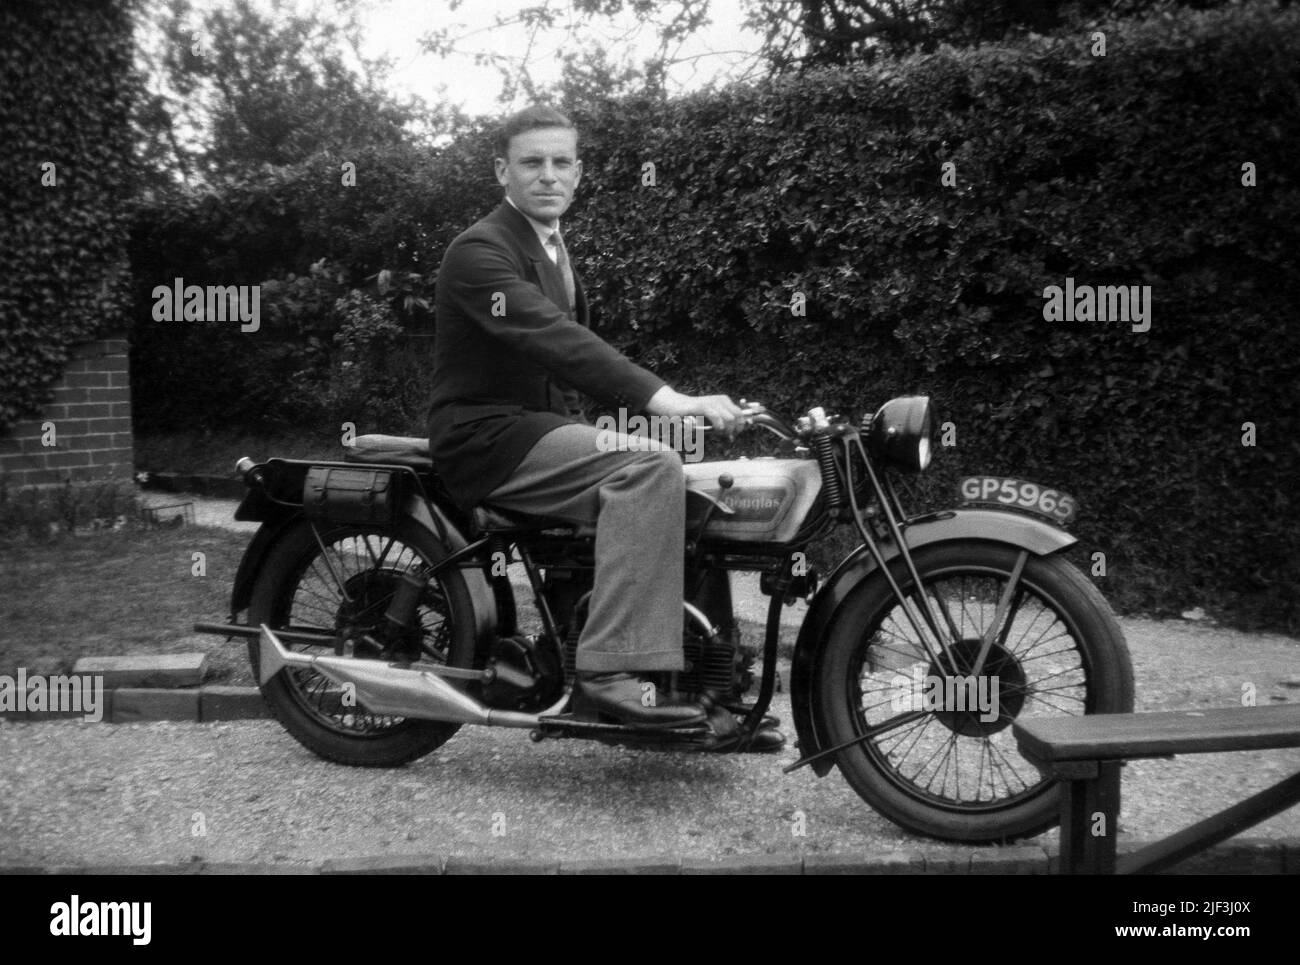 1930s, historical, a gentleman in a jacket & tie sitting in a driveway on a 'Douglas' motorcycle of the era, Newbury, Berks, England, UK. Douglas was a British motorcycle manufacturer based in Kingswood, Bristol, who operated from 1907 through to 1957. Owned by the Douglas family up to 1931, when it became a public company, they were known for their horizontally opposed twin cyclinder engined bikes and in the 1920s were awarded a prestigious royal warrant as Motor Cycle Manufacturers by Appointment to H. M. The King (King George VI). Stock Photo